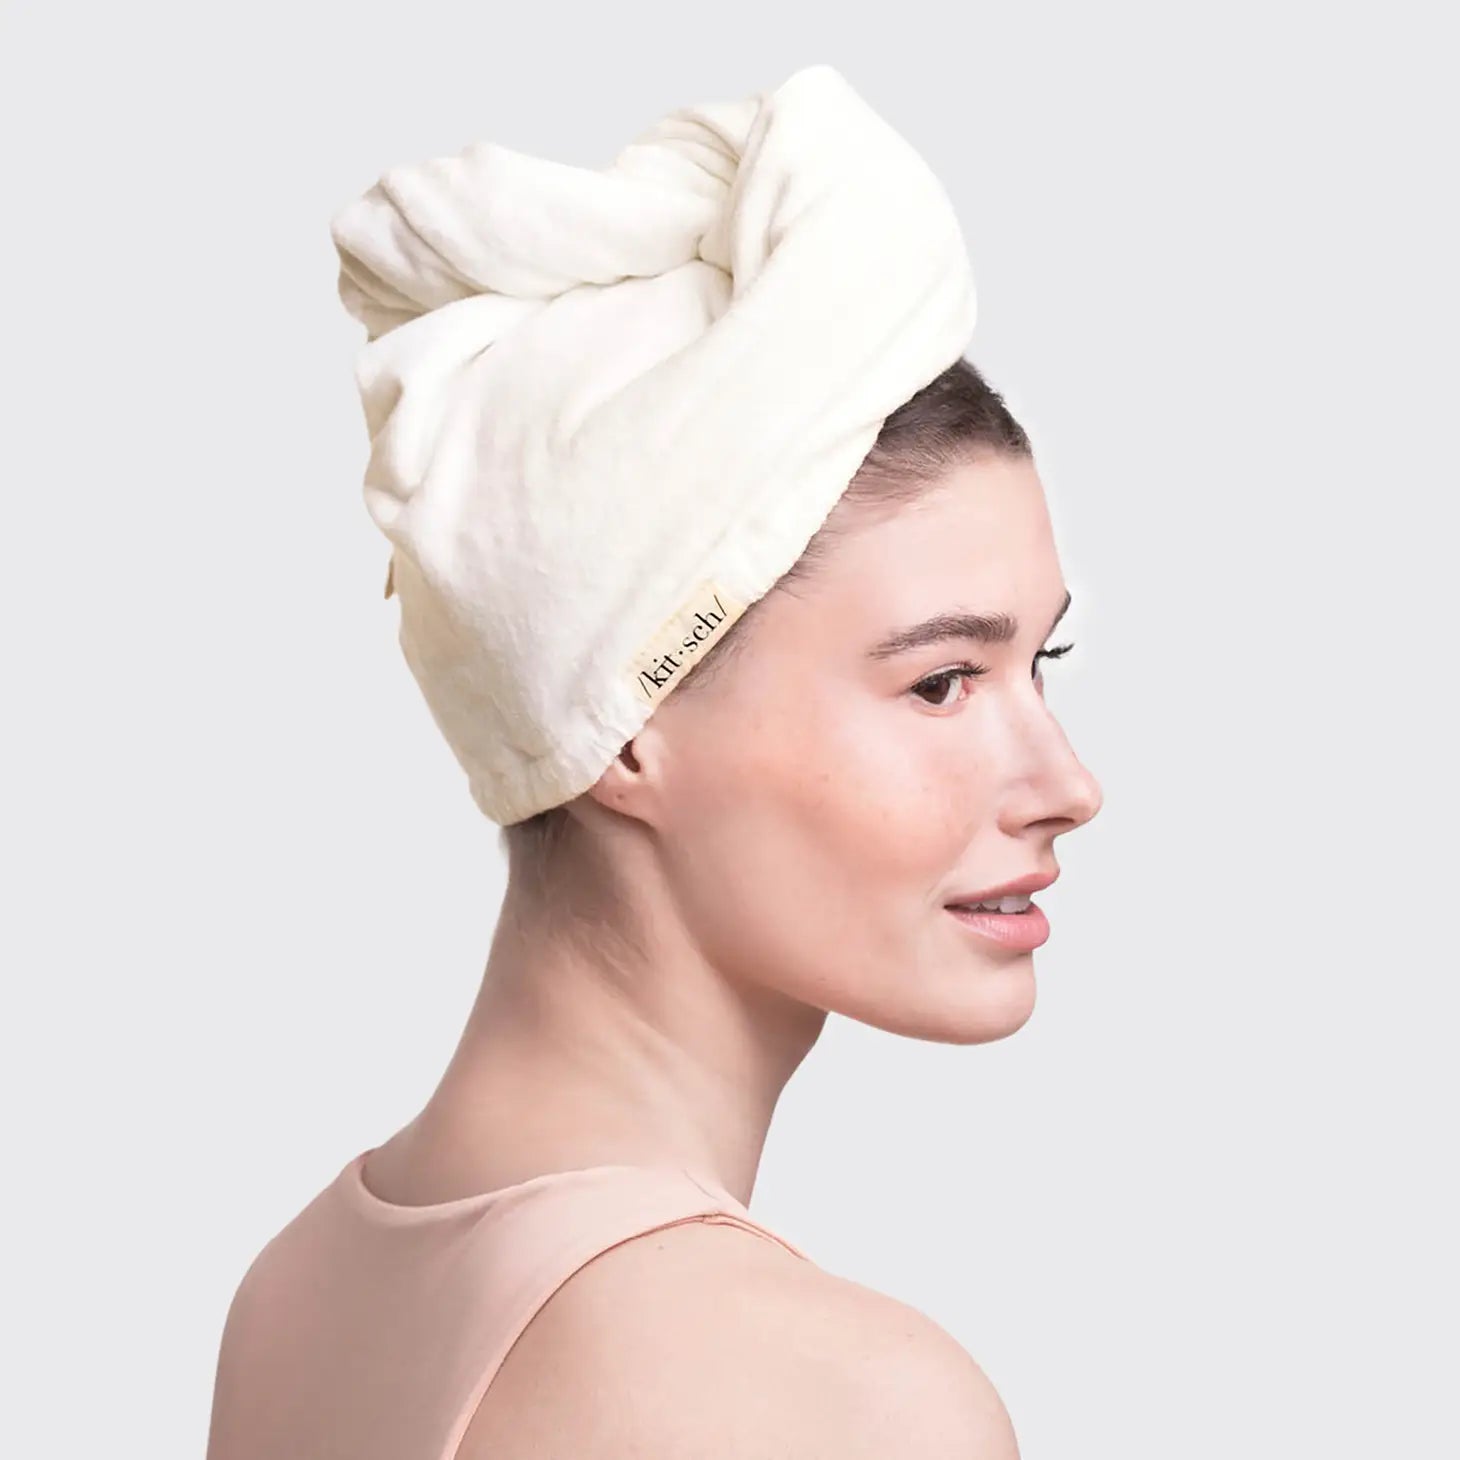 KITSCH - Quick Dry Hair Towel - 2 Colors!